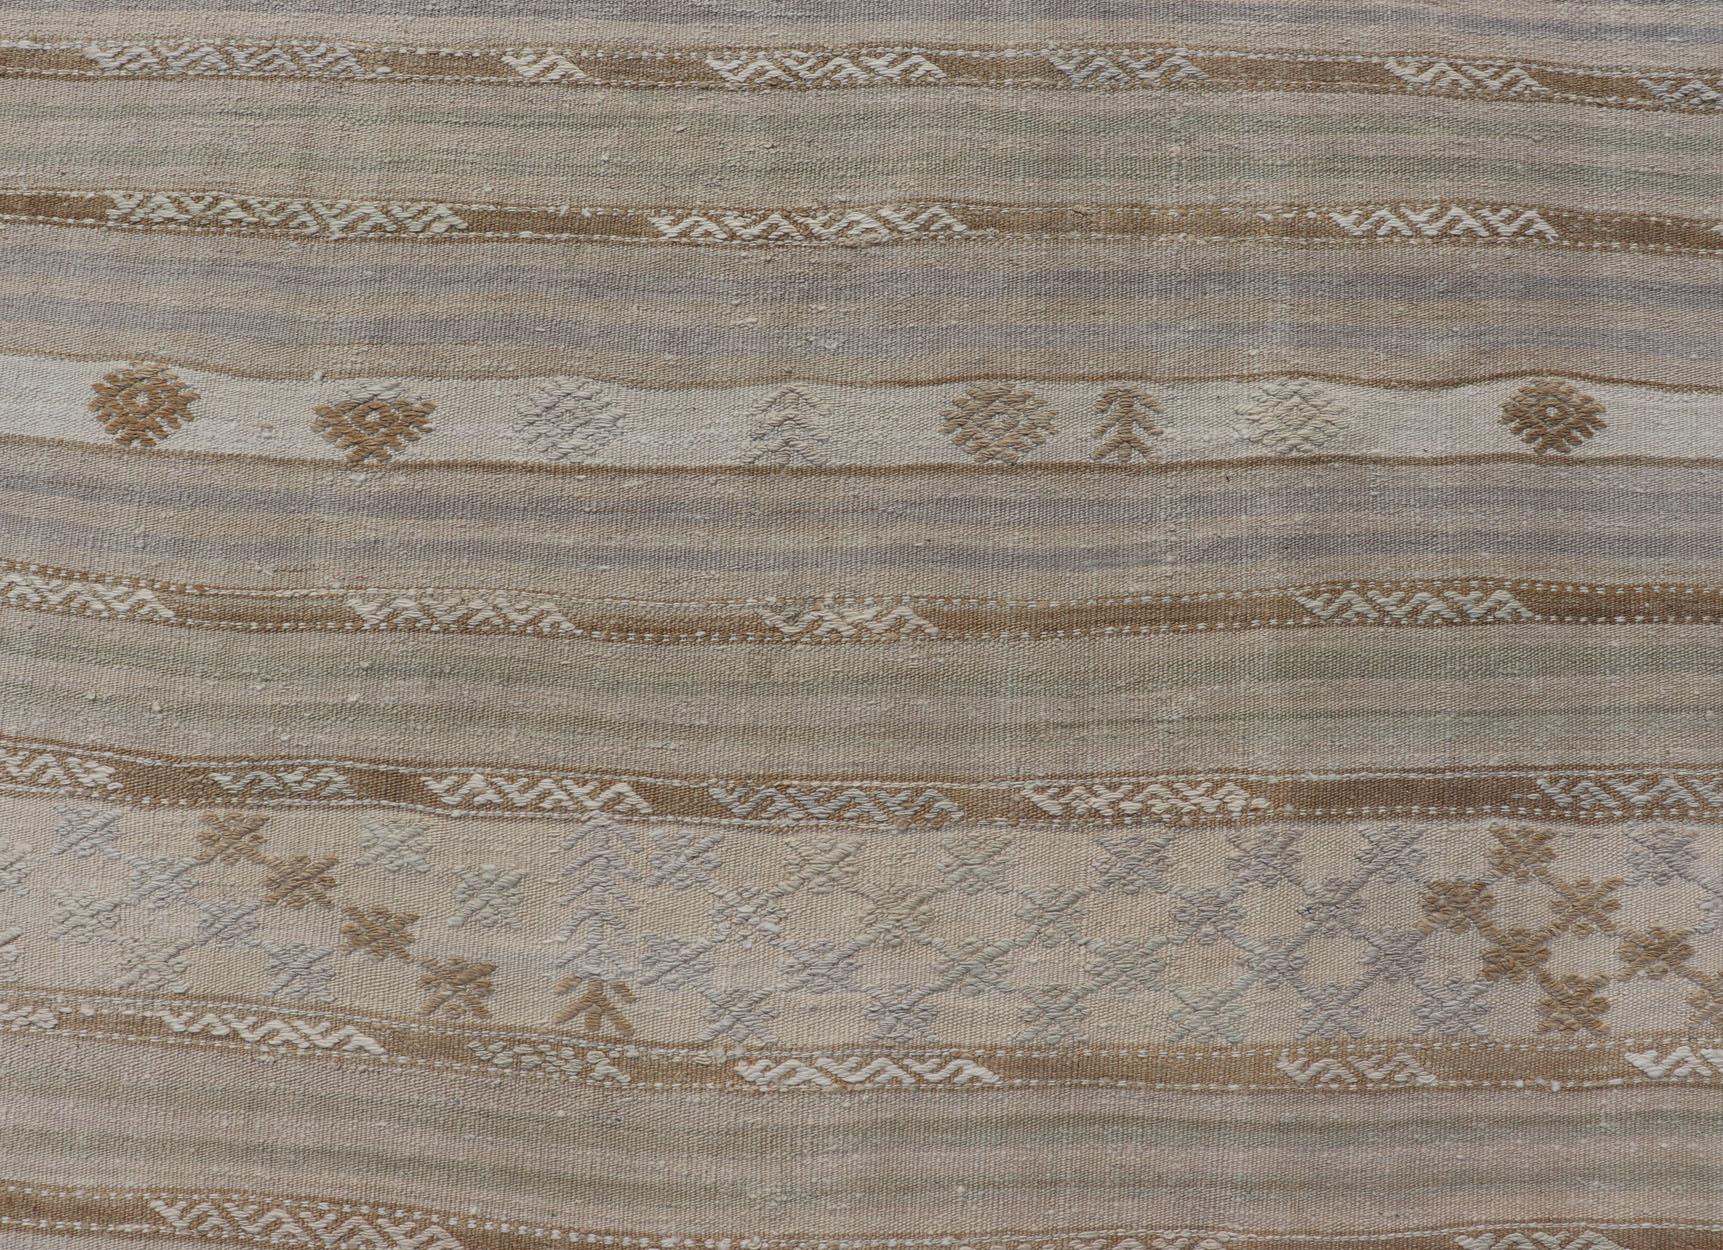 Striped Turkish Flat-Weave Kilim in Muted Colors and Tribal Motifs For Sale 5